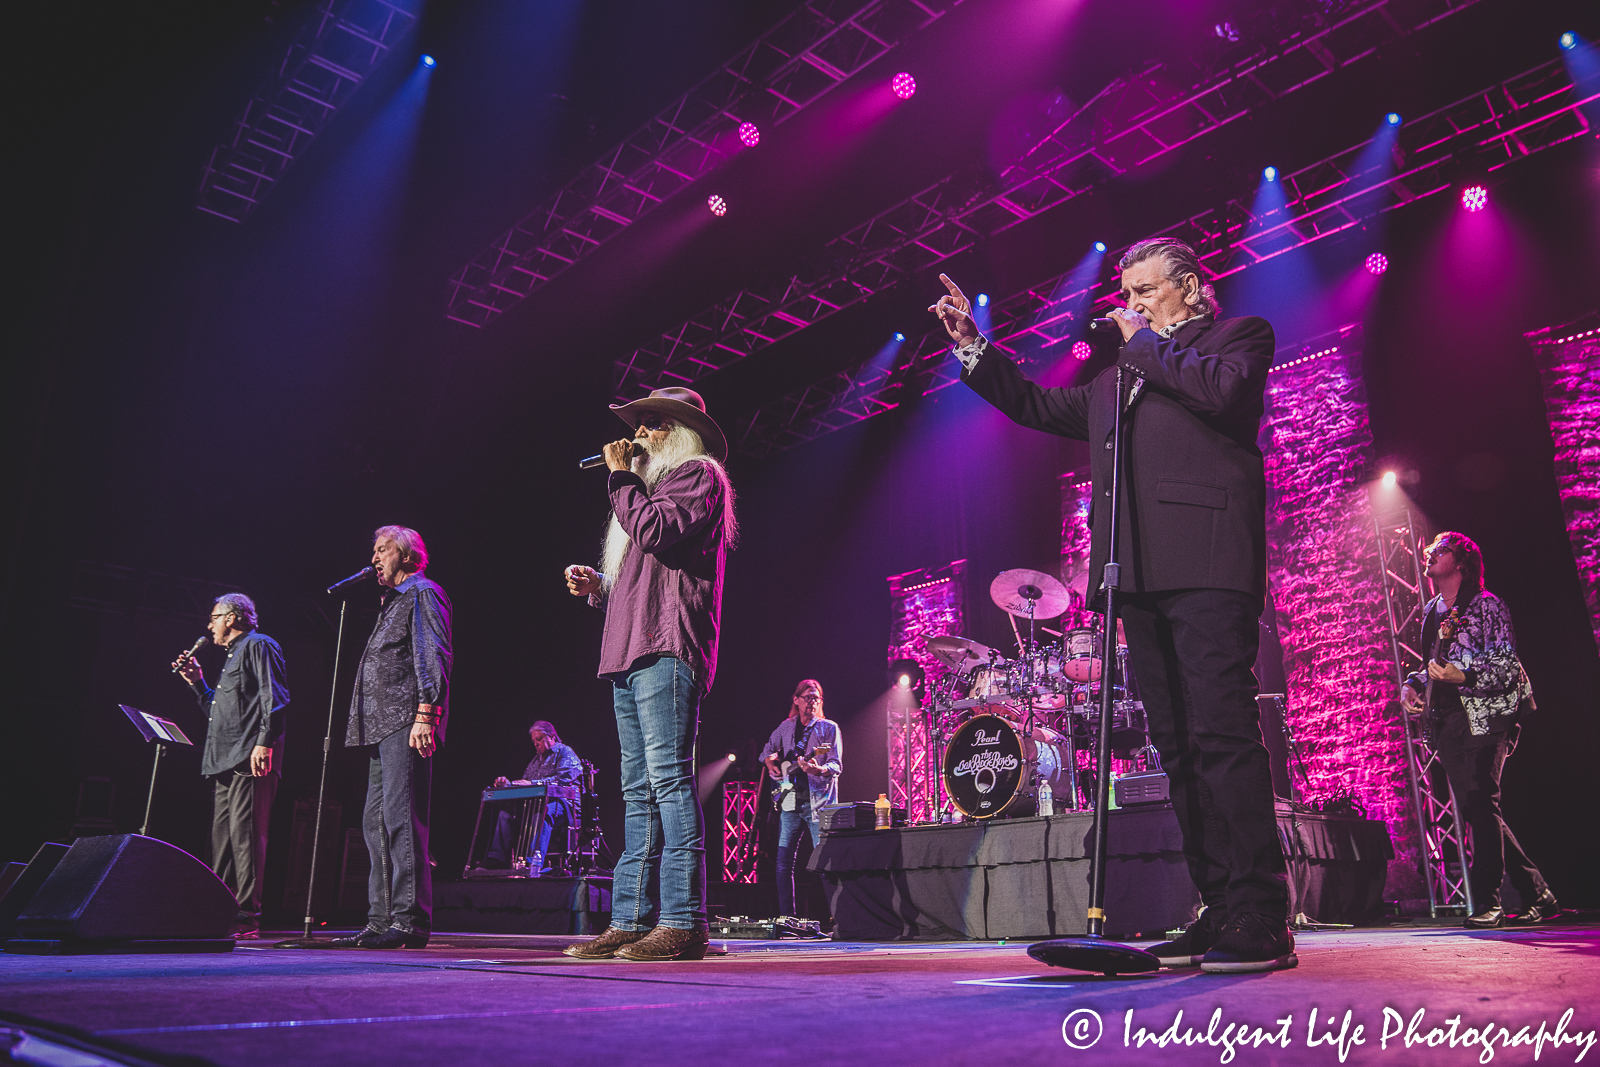 The Oak Ridge Boys performing live in concert with Rudy Gatlin at Ameristar Casino's Star Pavilion in Kansas City, MO on July 15, 2022.